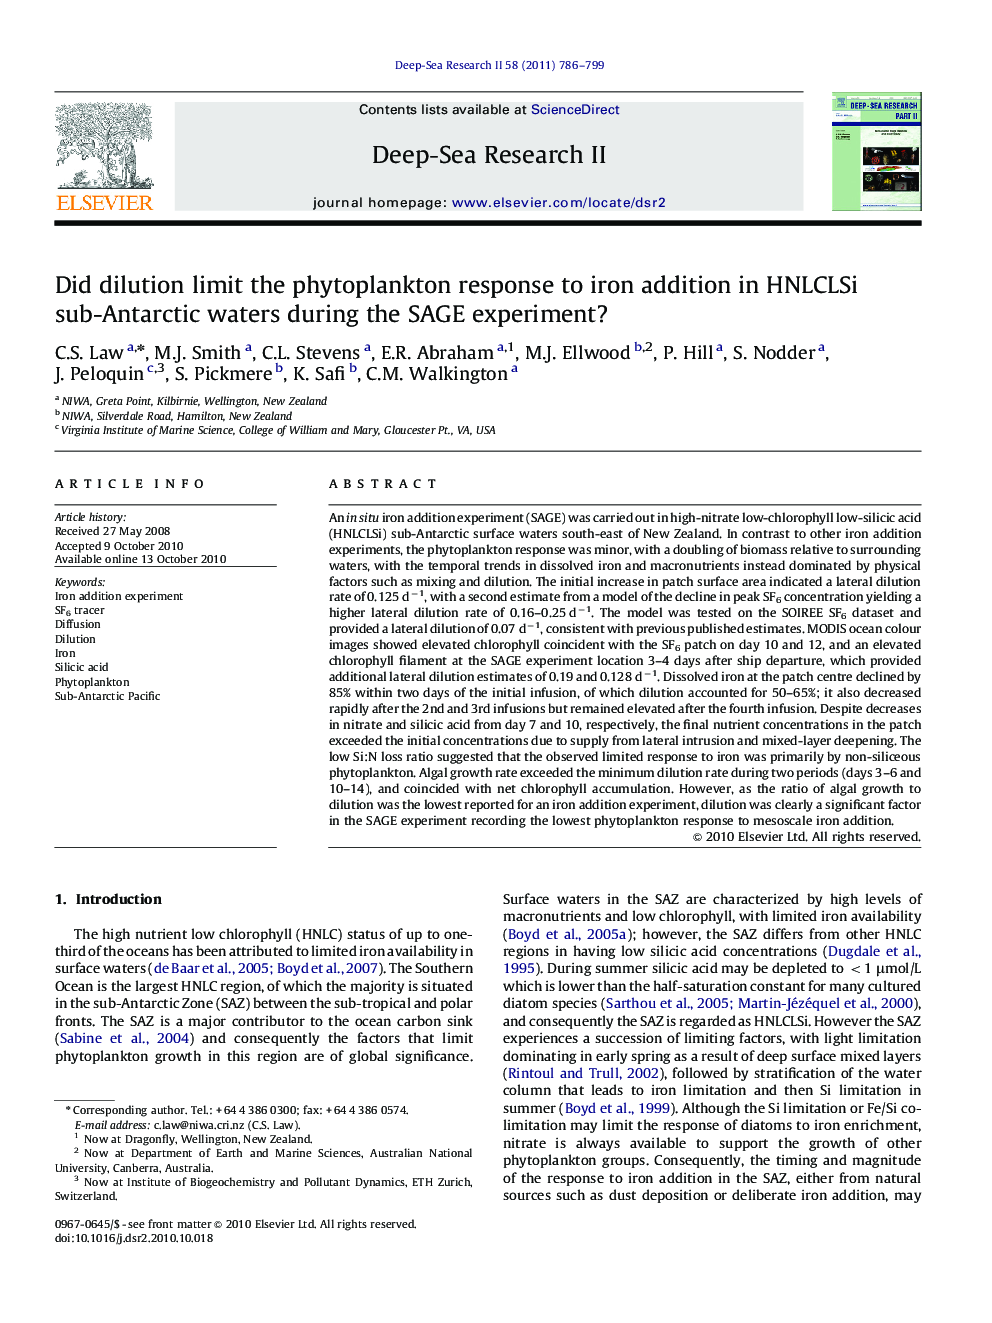 Did dilution limit the phytoplankton response to iron addition in HNLCLSi sub-Antarctic waters during the SAGE experiment?